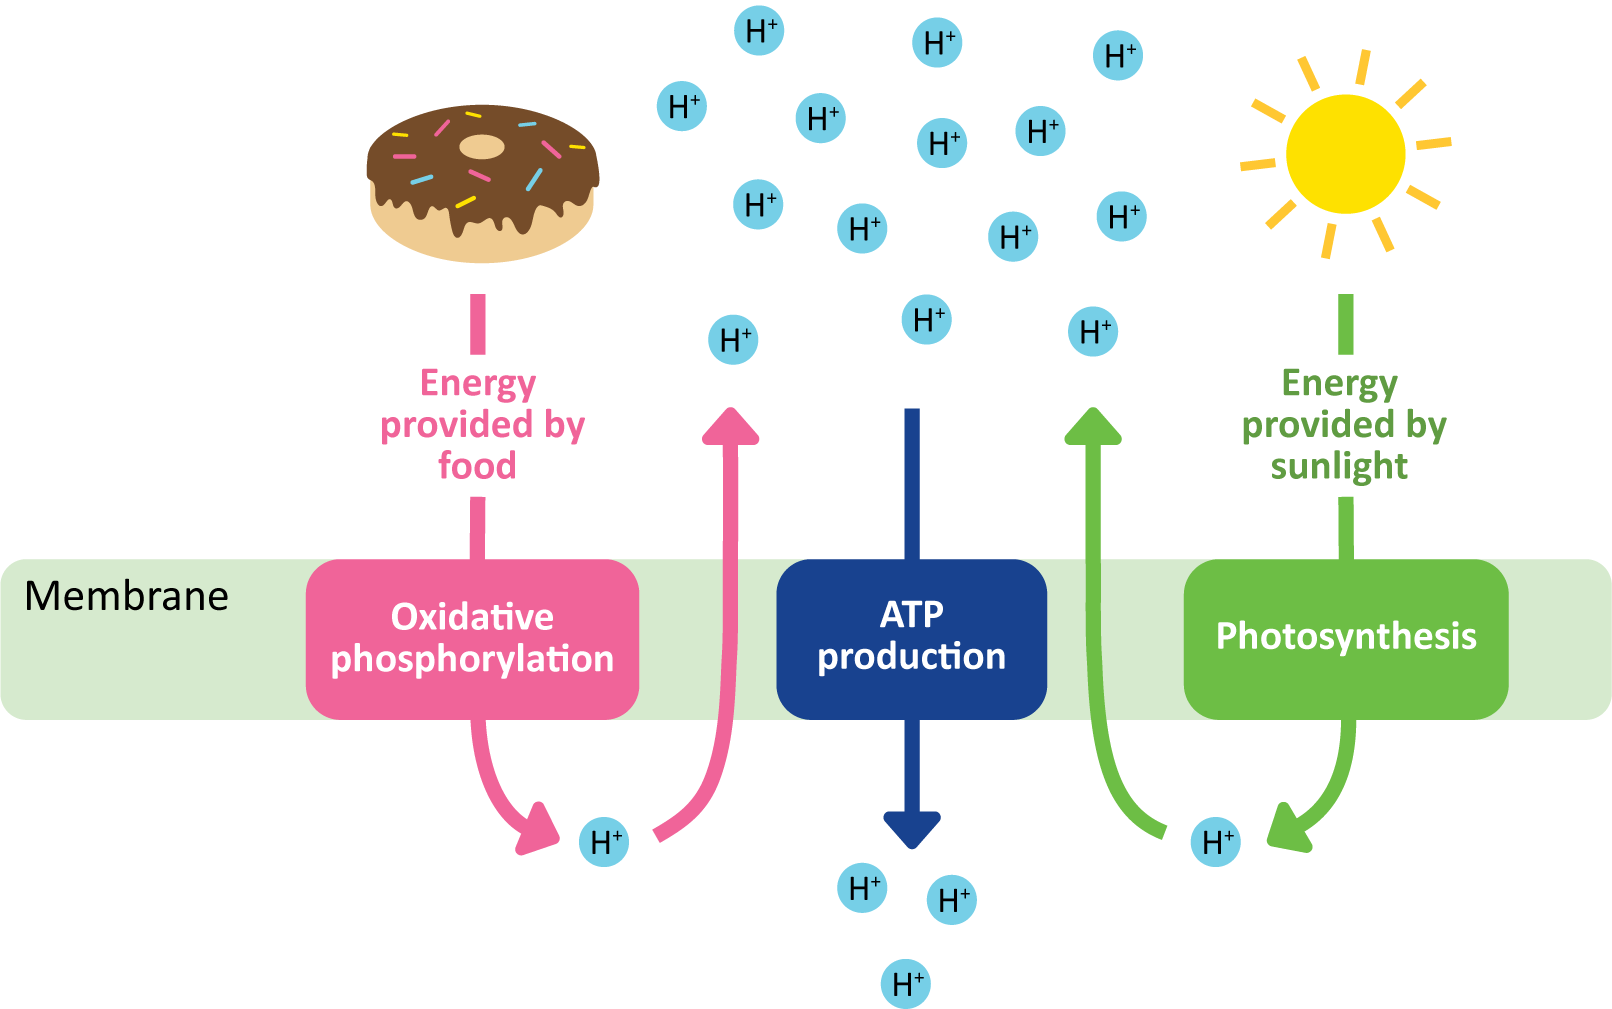 Light and food energy help build a proton gradient